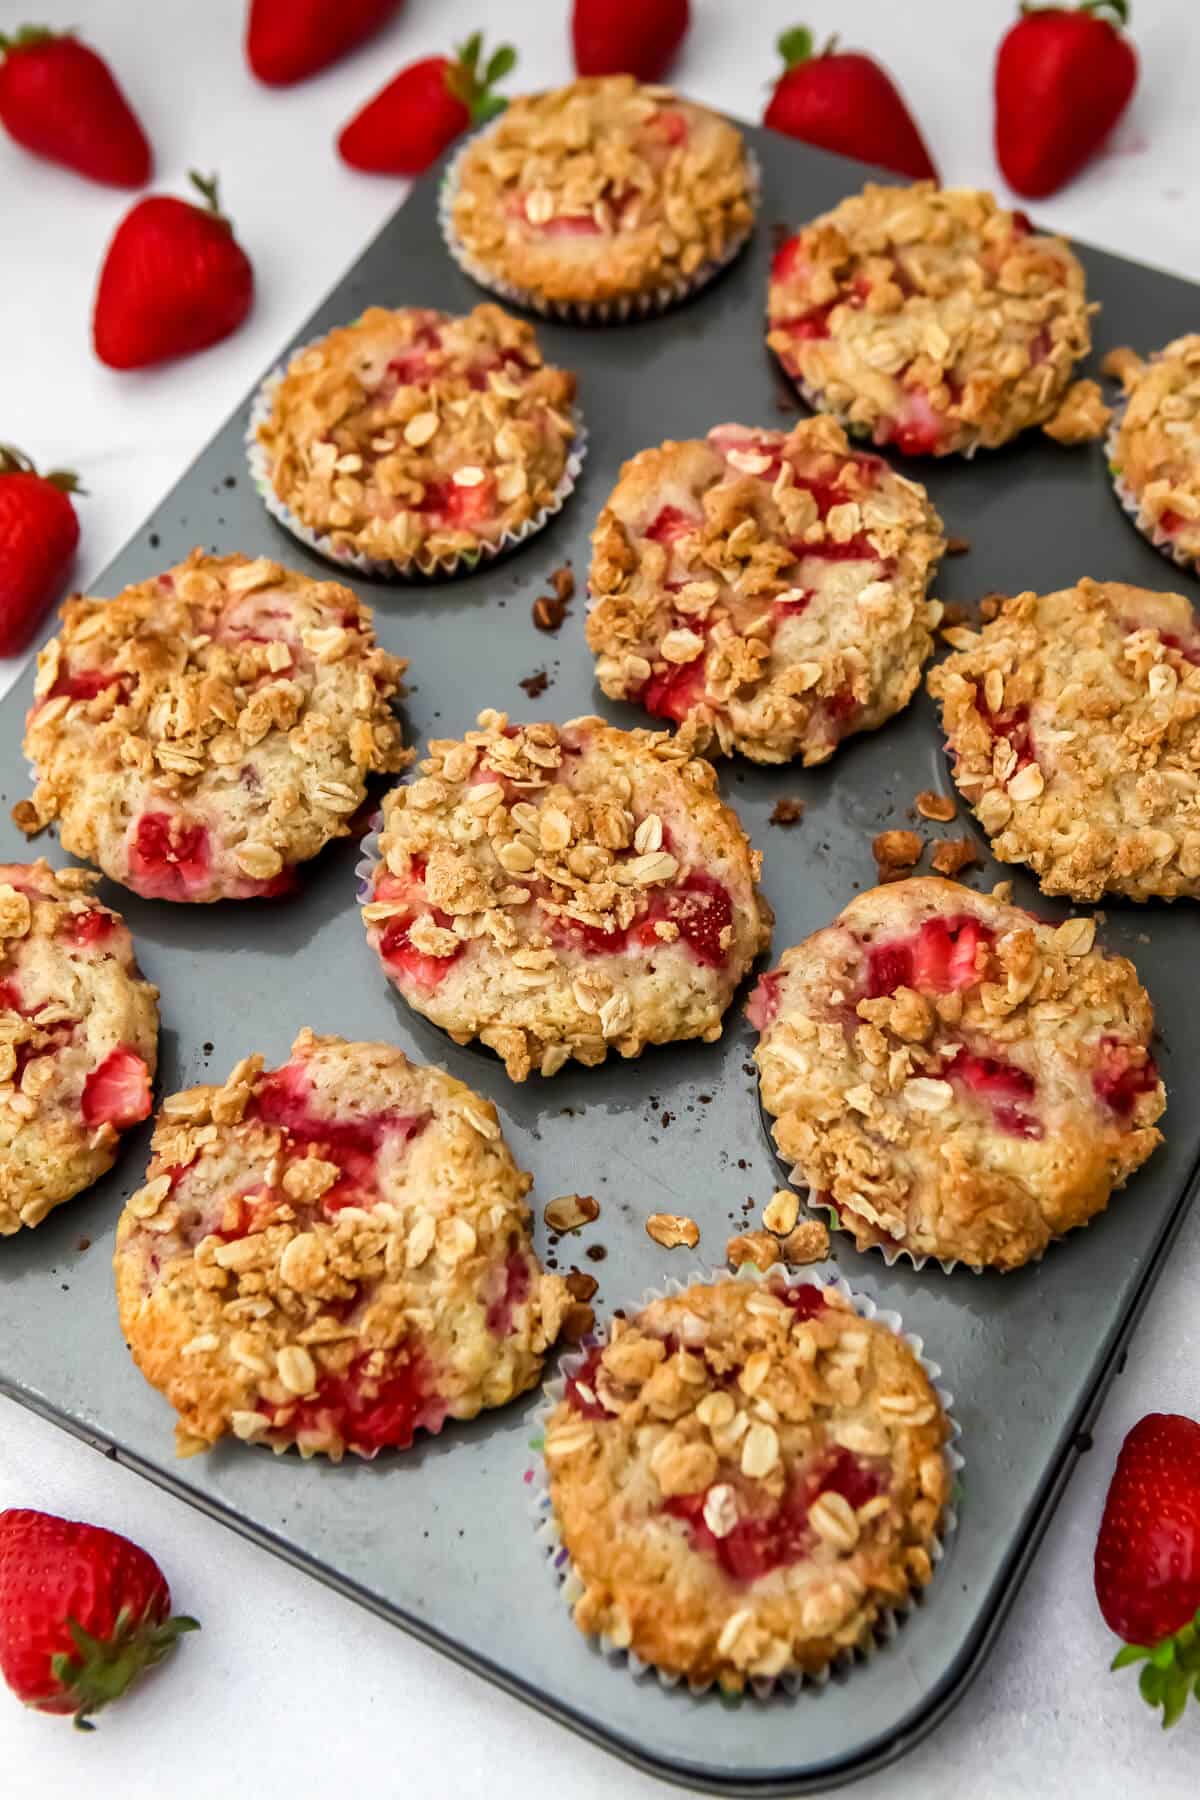 Baked vegan strawberry muffins in a muffin tin.